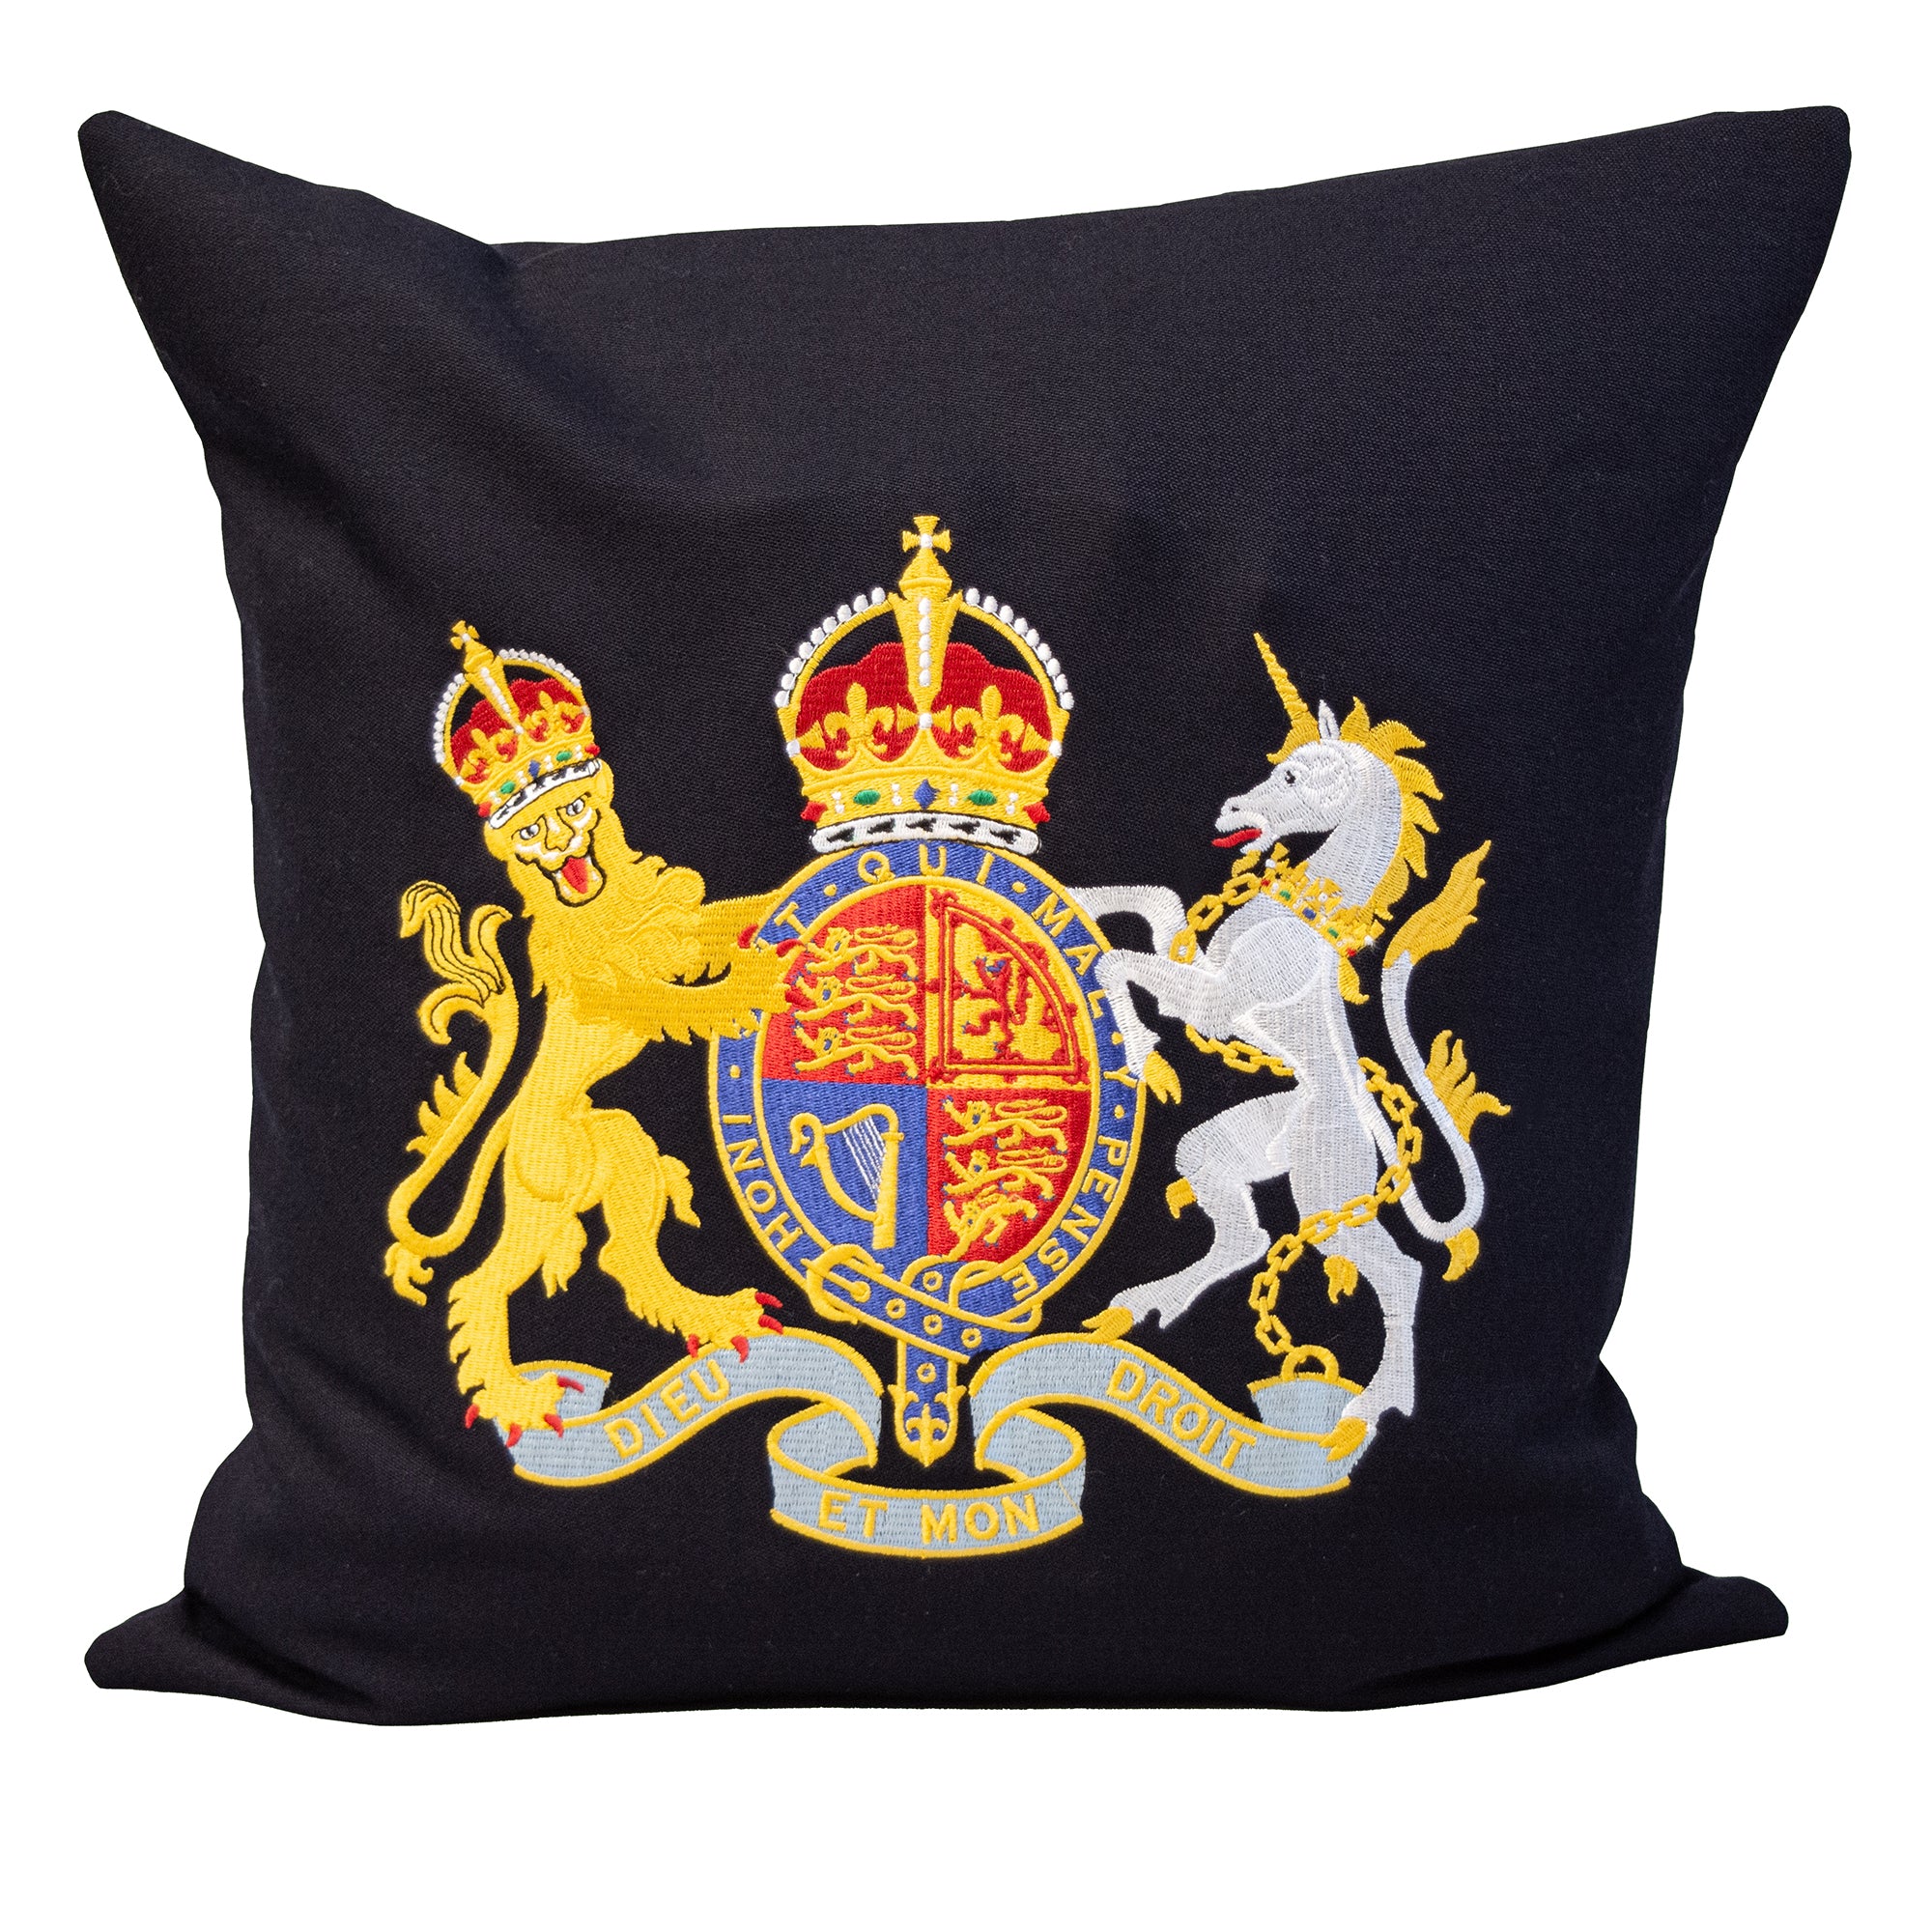 Lieutenancy Coat of Arms with Kings Crown - Machine Embroidered Cushion Cover